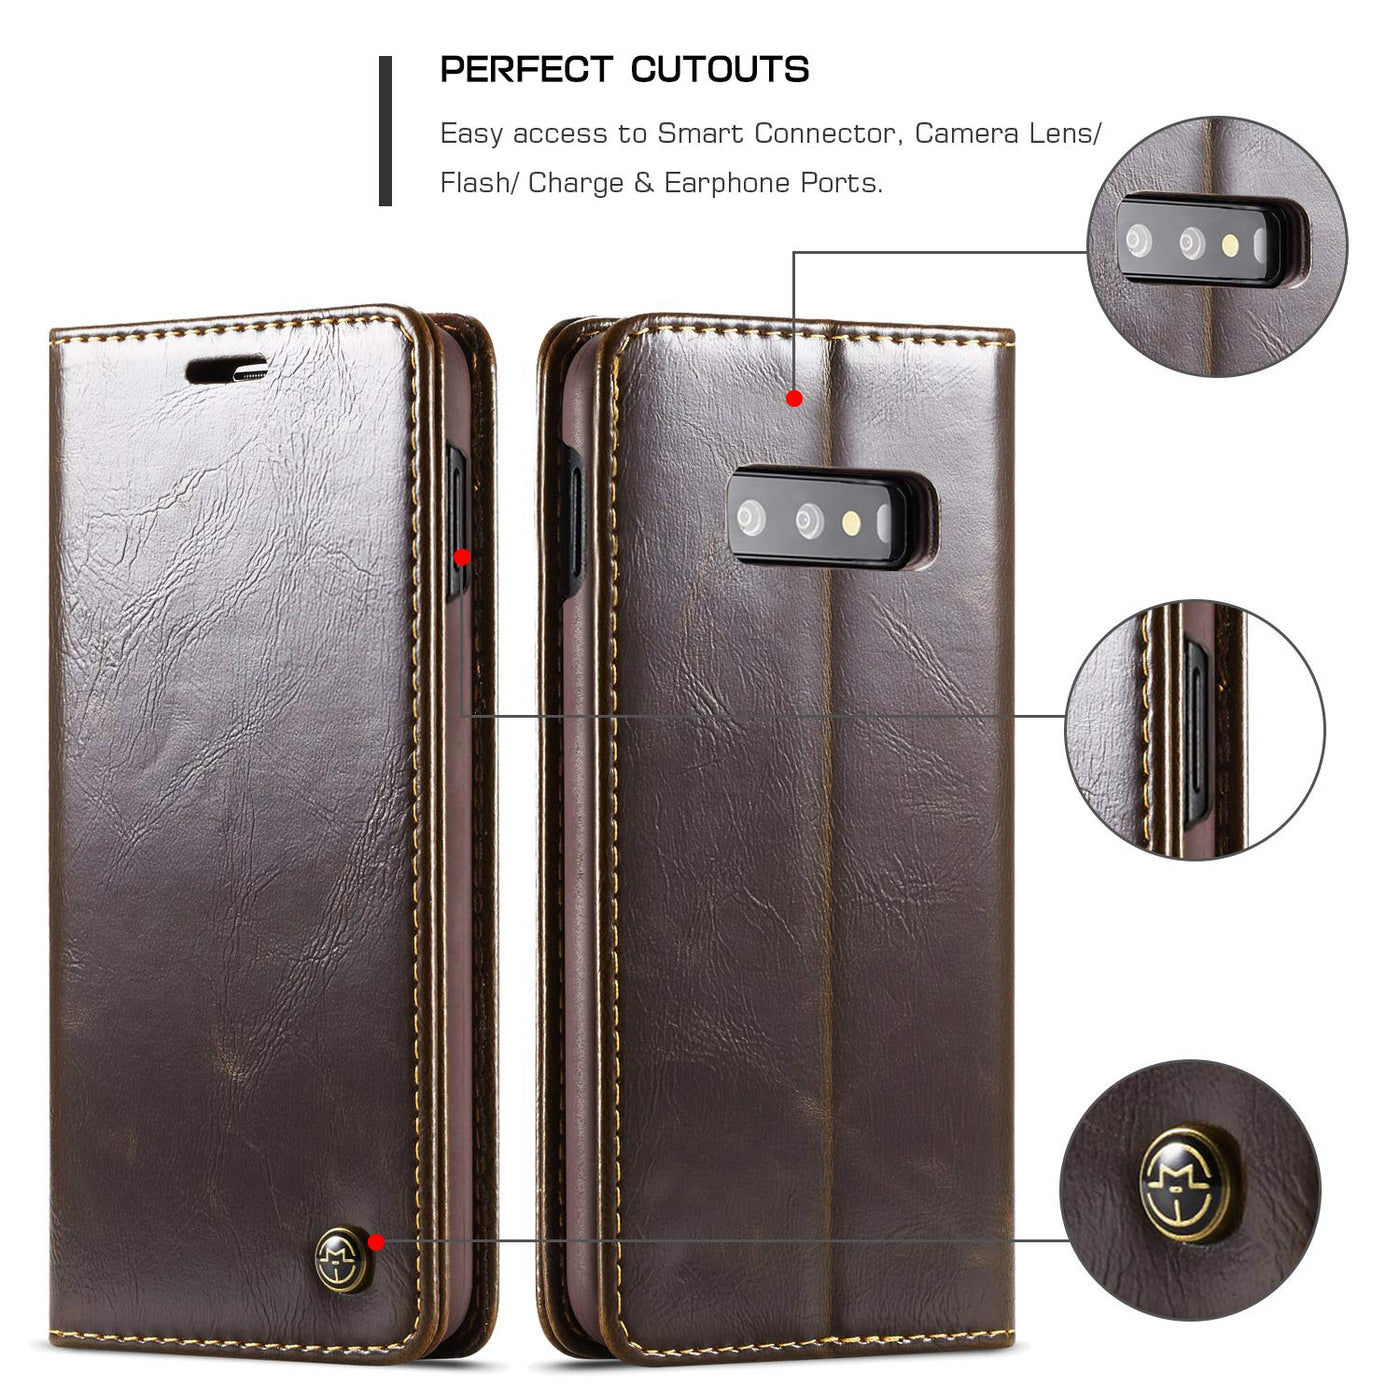 Samsung Galaxy S10e full body protection Leather Wallet flip case cover by Excelsior